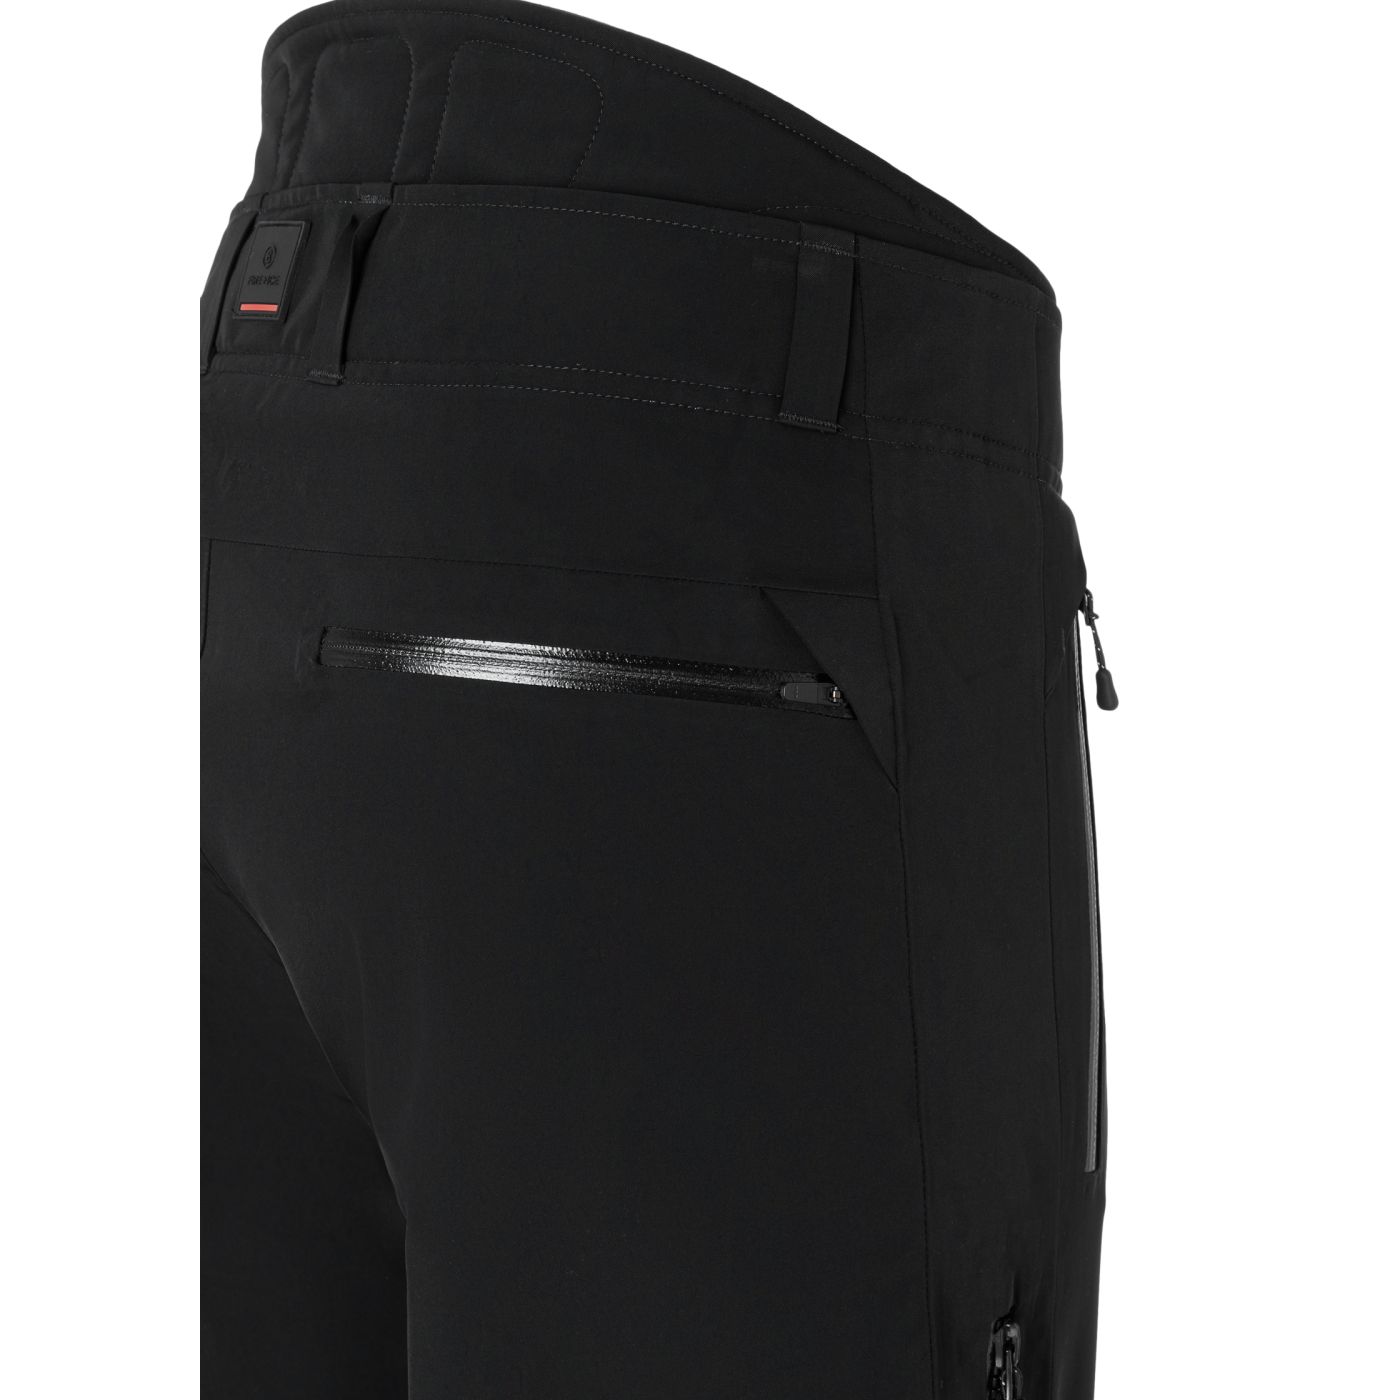 Ski & Snow Pants -  bogner fire and ice Nic-T Ski Trousers